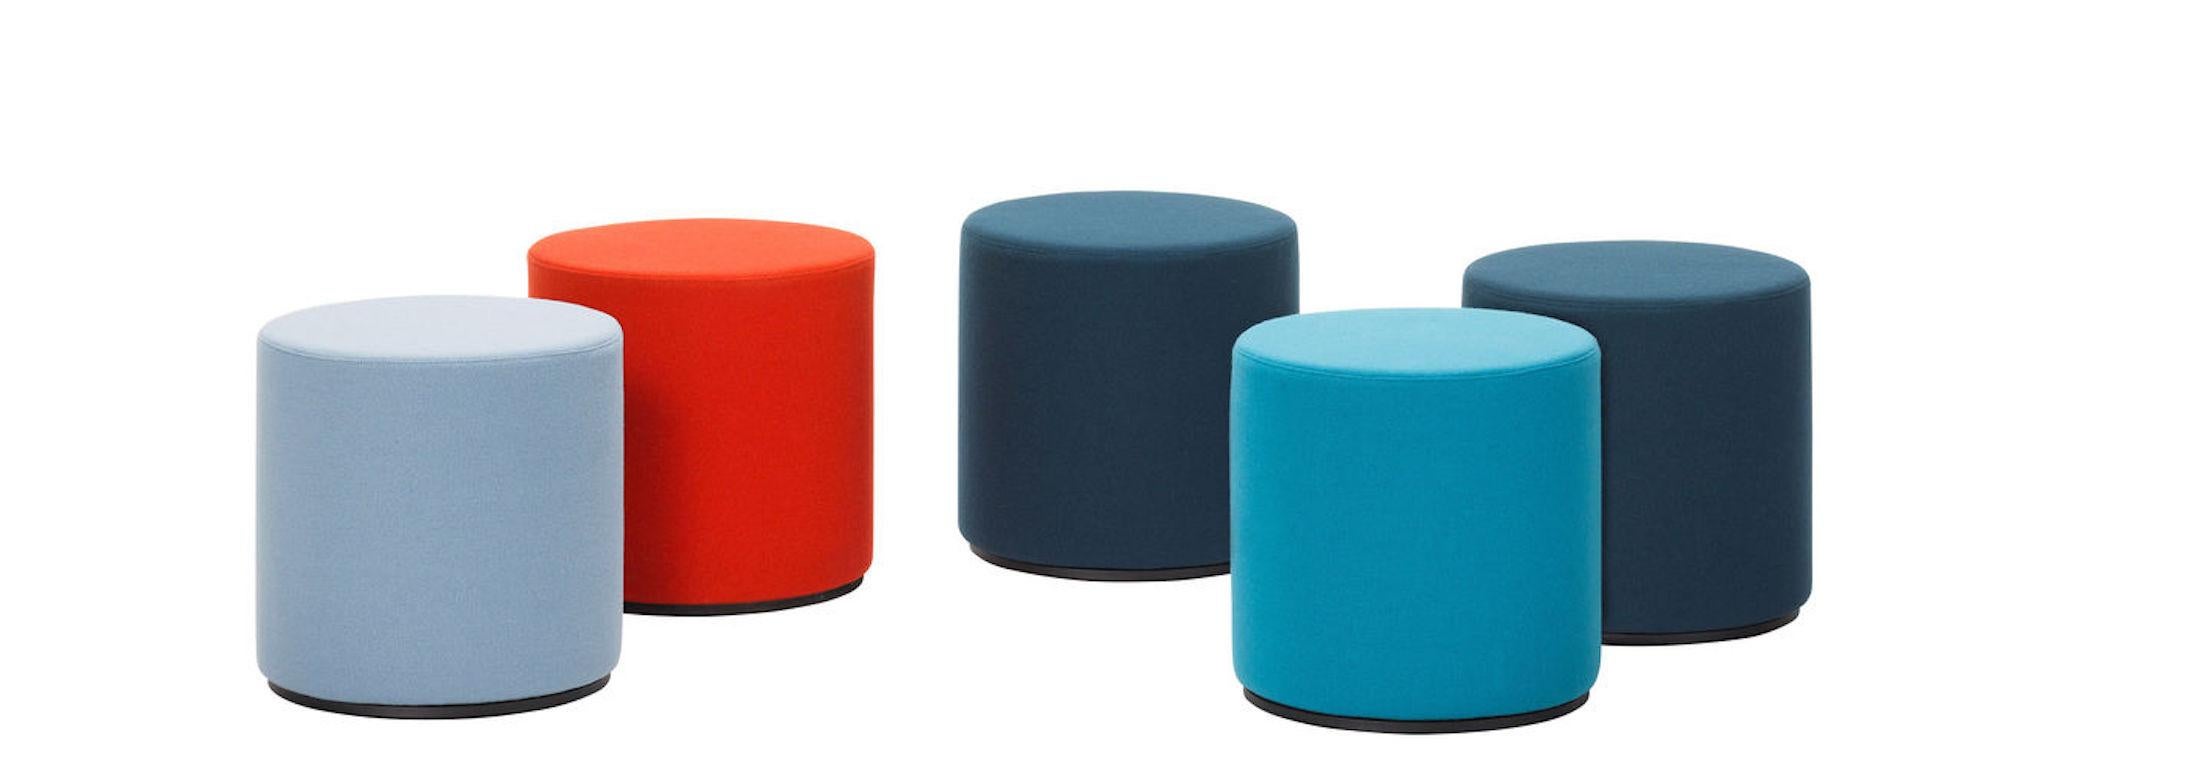 Verner Panton designed the Visiona stool as part of the interior installation created in 1970 for his legendary Visiona exhibition in Cologne. The compact upholstered stool not only provides practical and comfortable seating but also adds vibrant